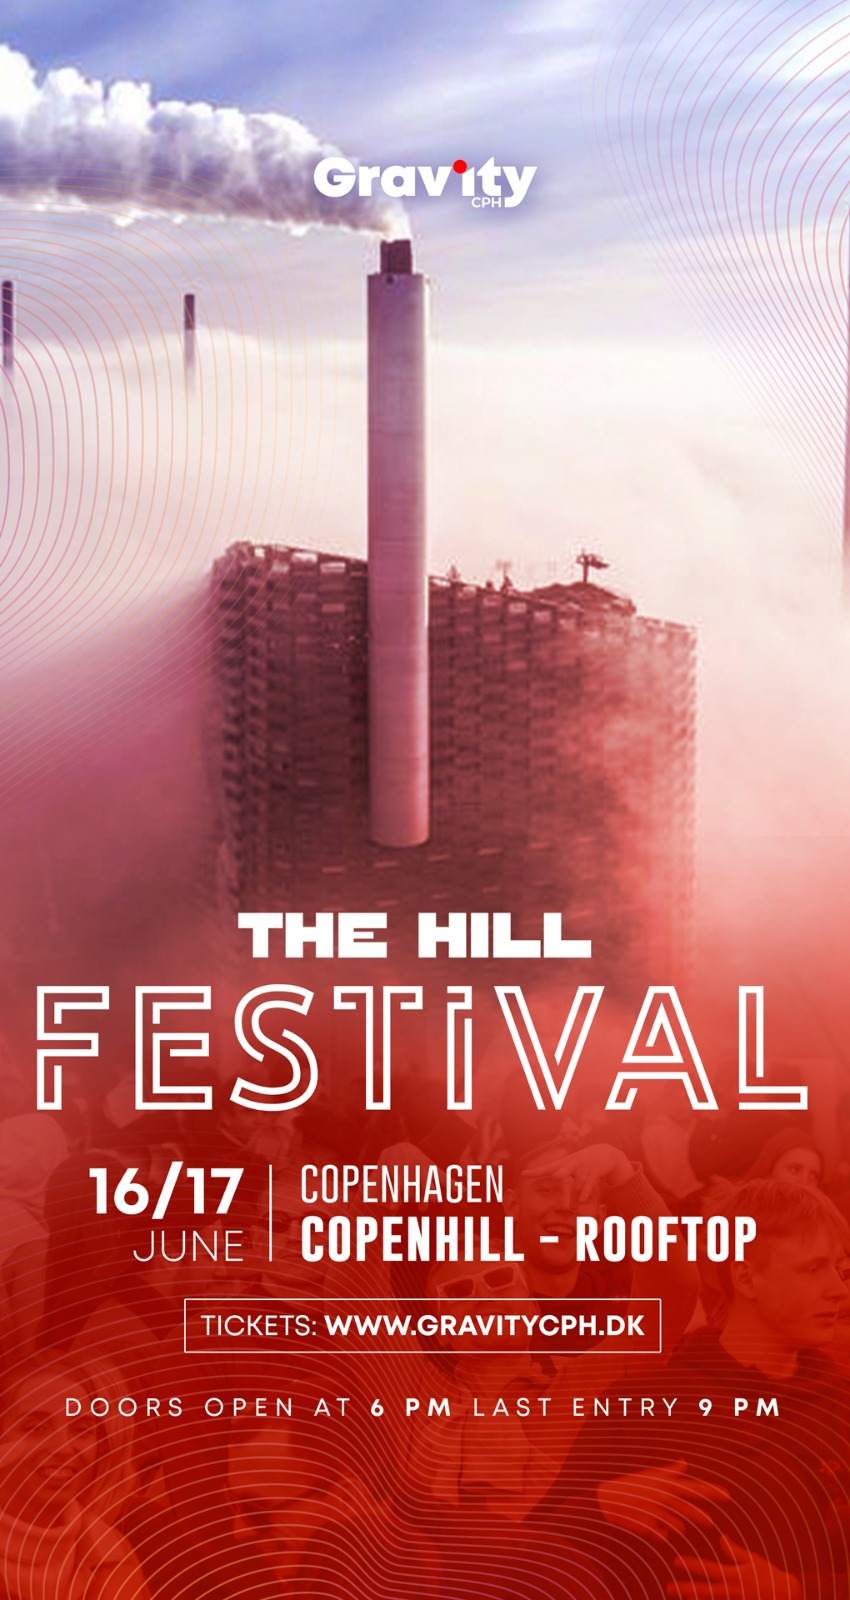 Gravity: The Hill Festival - Rooftop location - フライヤー表